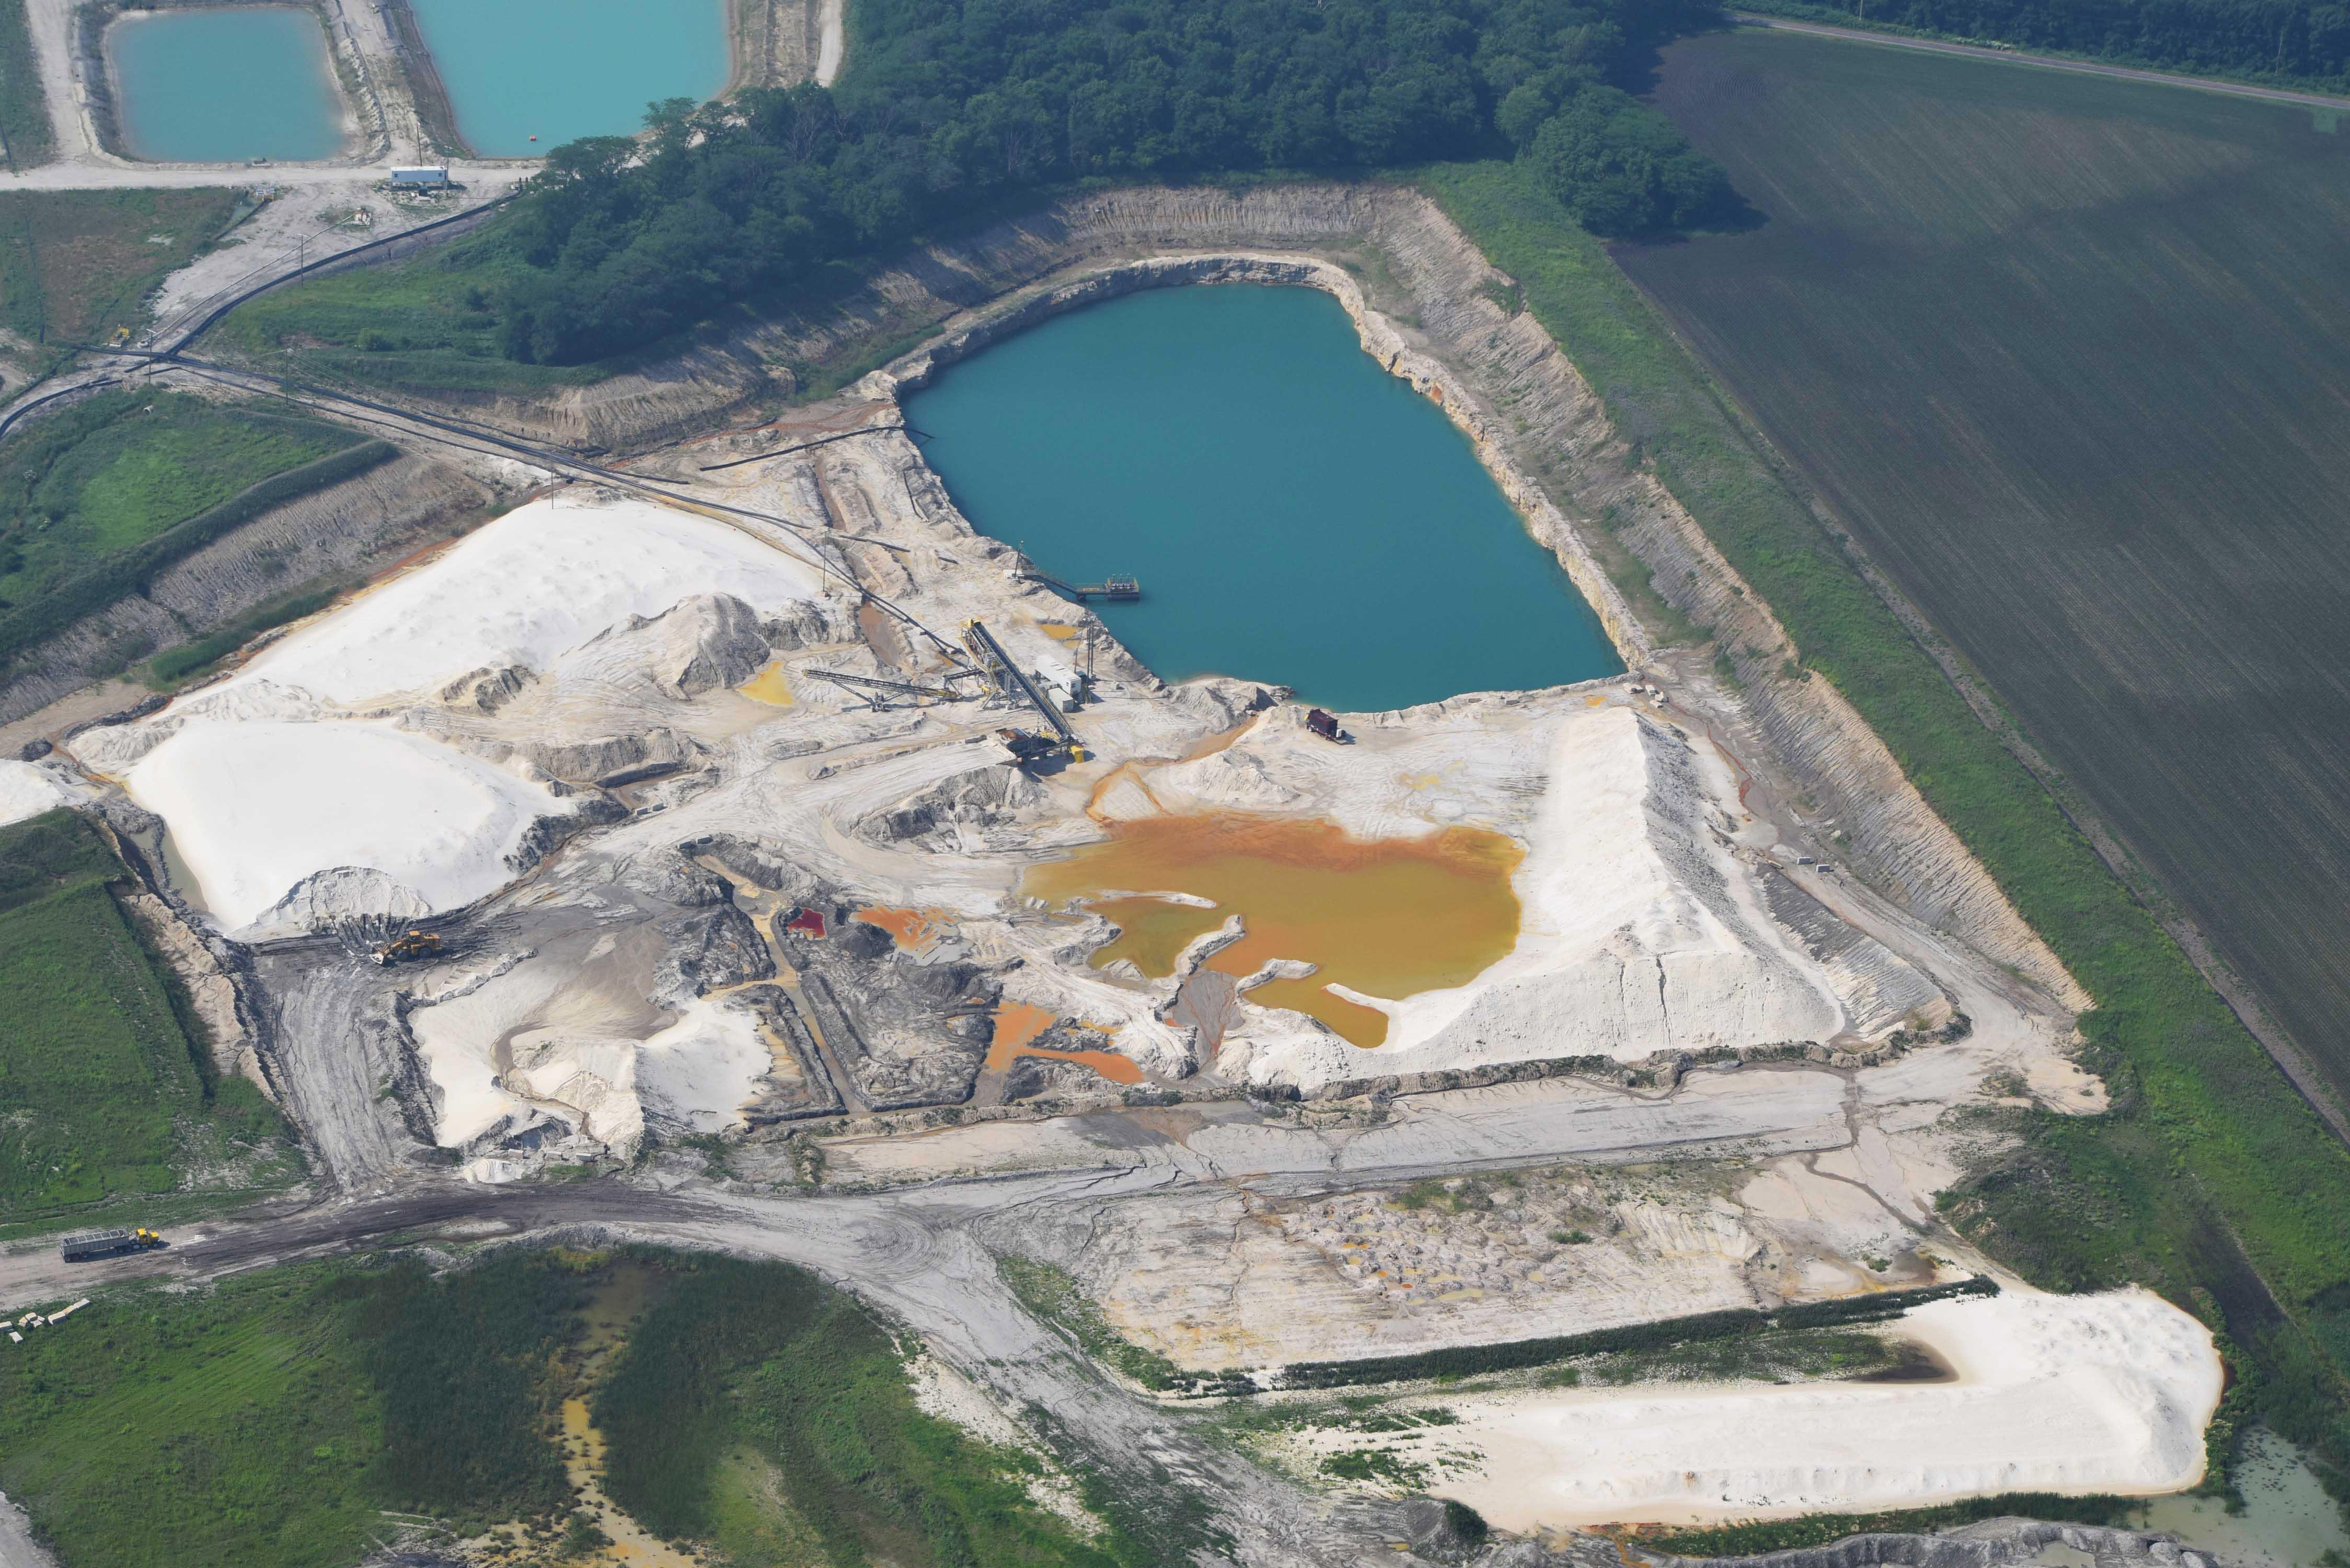 A sand mine in LaSalle County operated by U.S. Silica (Ted Auch / FracTracker Alliance)